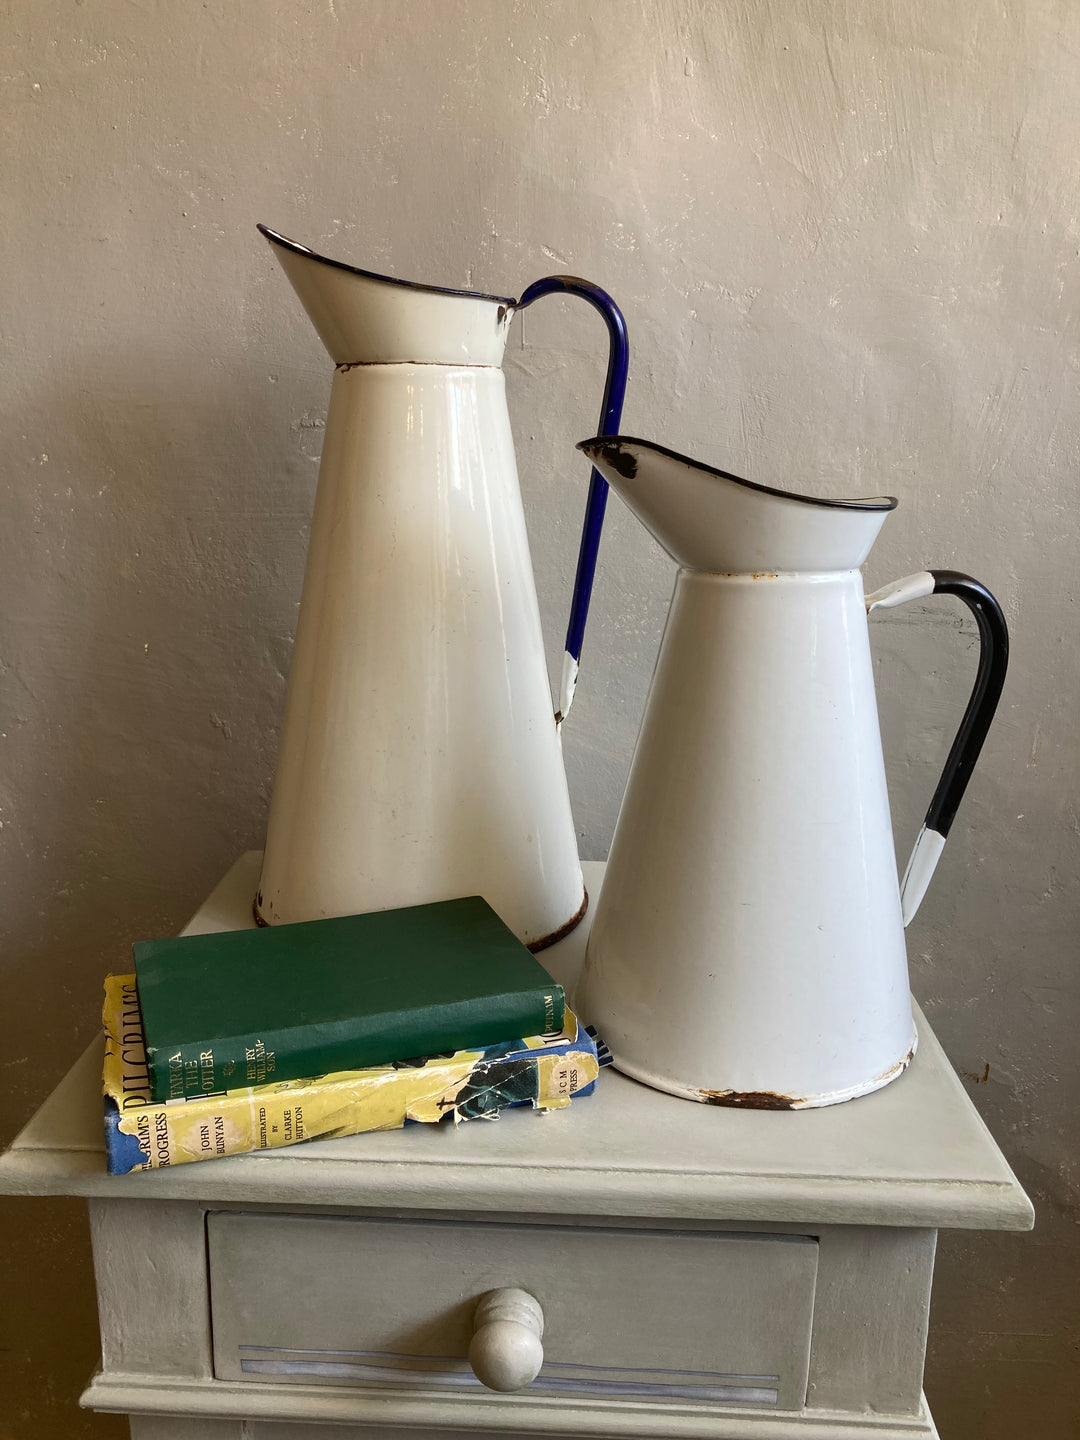 charming enamelware jugs for sale at Source for the Goose, Devon